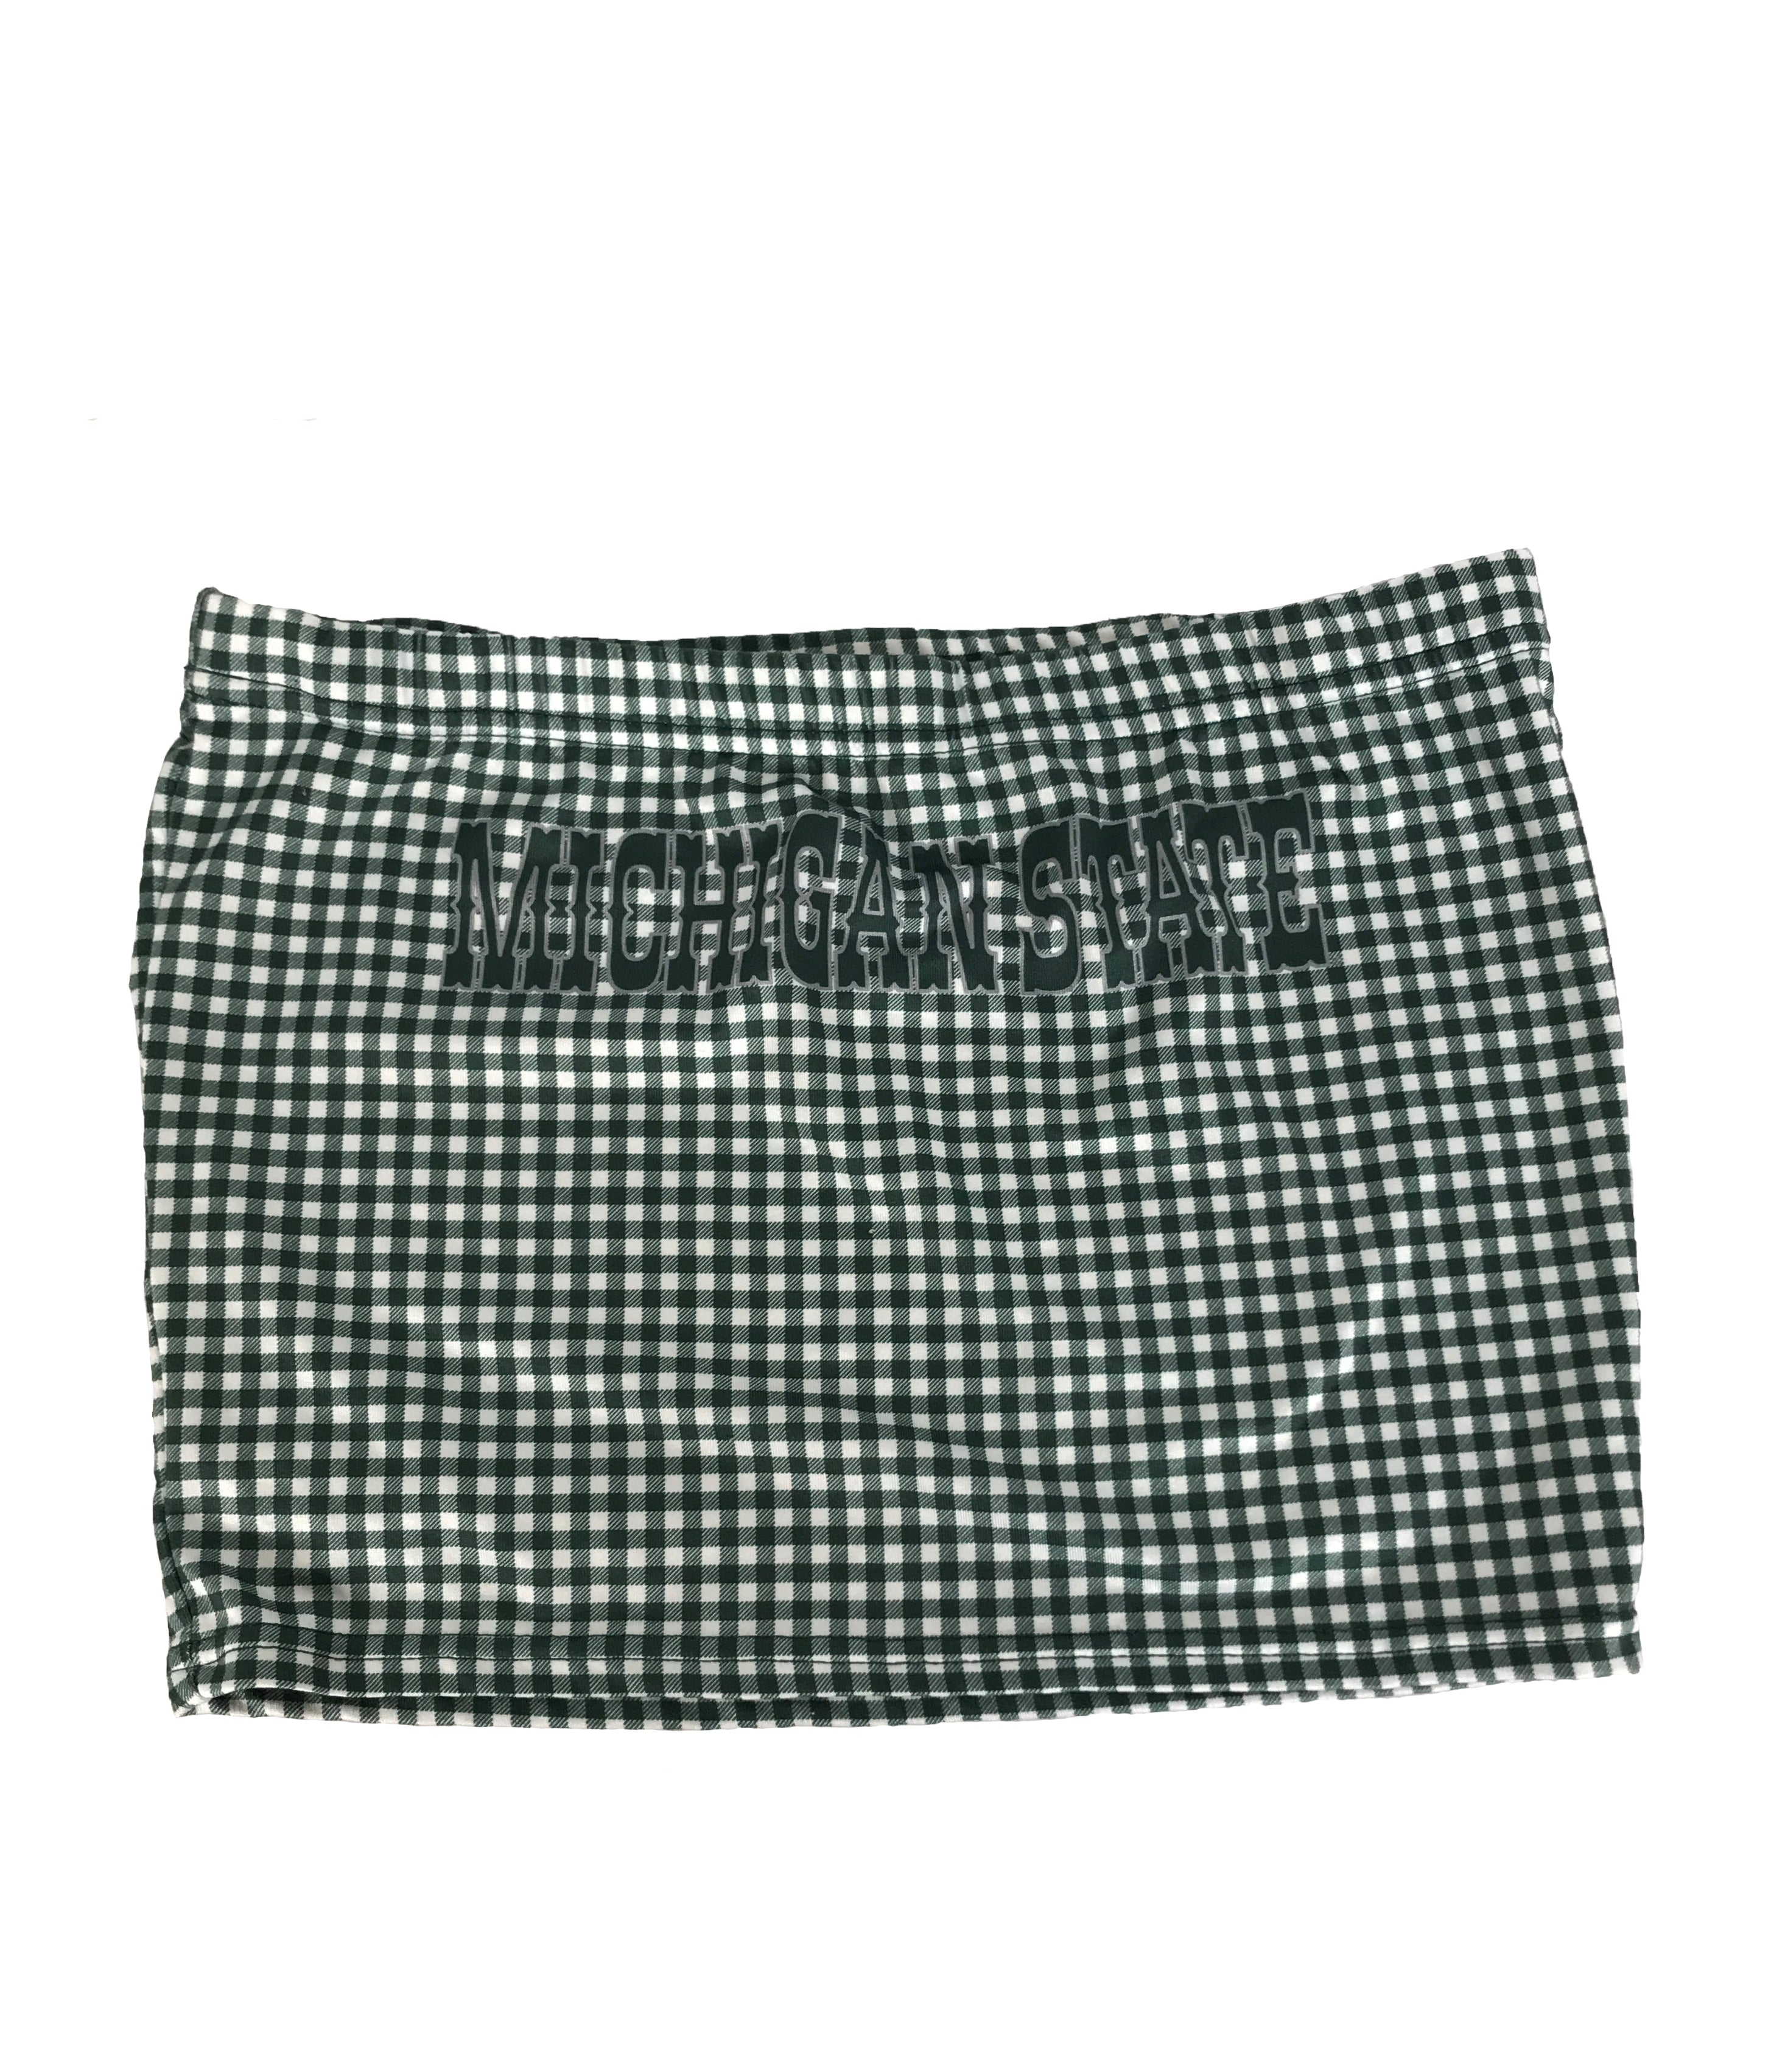 Michigan State Gingham Patterned Tube Top Women's Size M